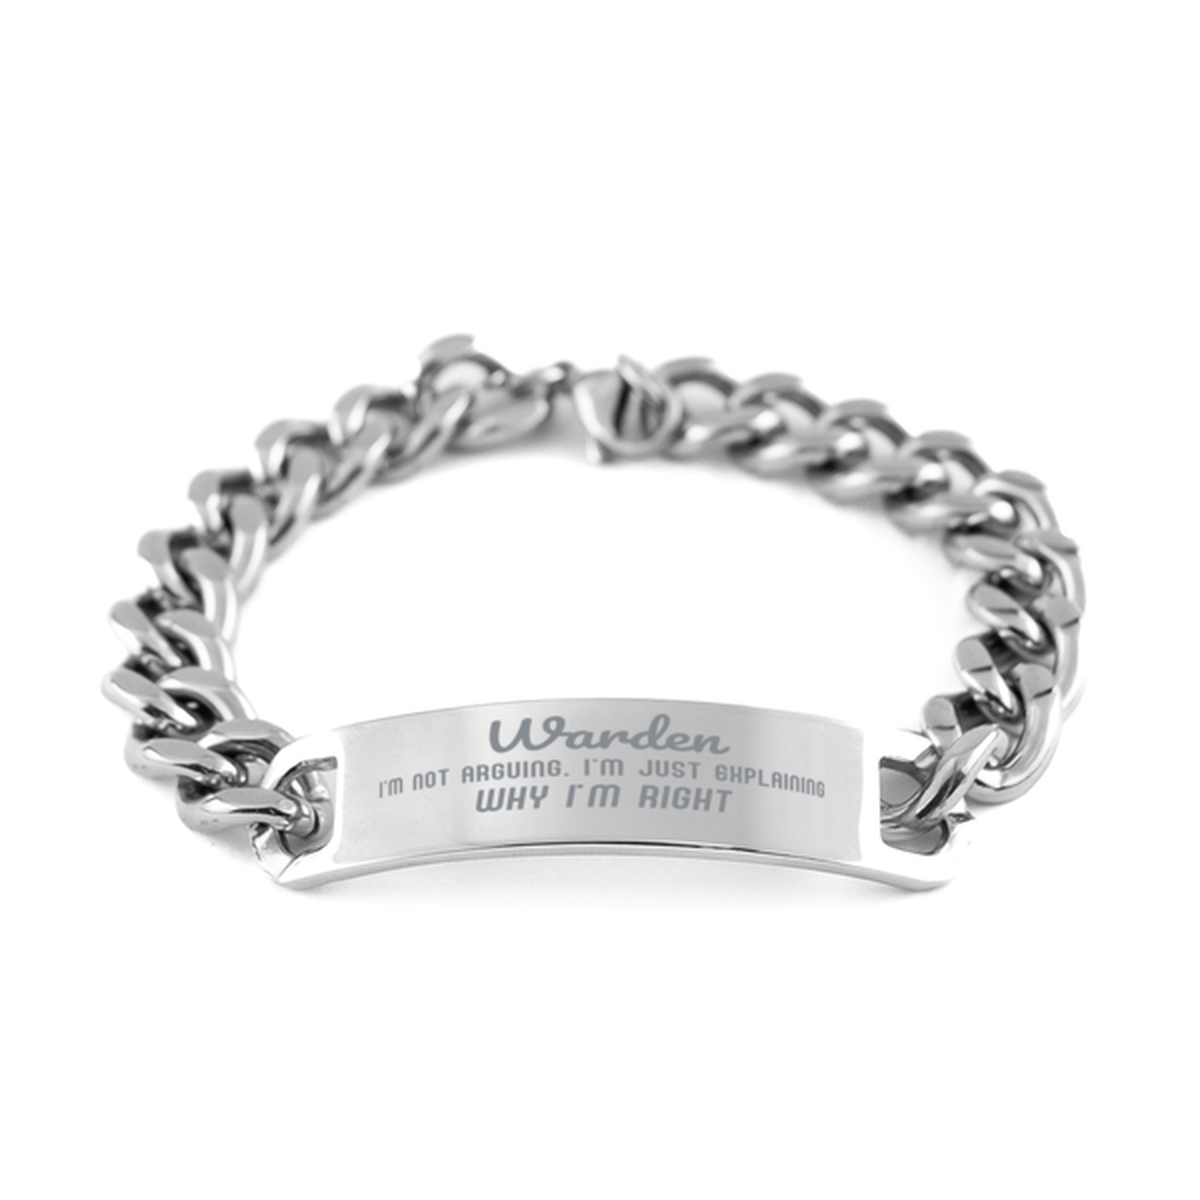 Warden I'm not Arguing. I'm Just Explaining Why I'm RIGHT Cuban Chain Stainless Steel Bracelet, Graduation Birthday Christmas Warden Gifts For Warden Funny Saying Quote Present for Men Women Coworker